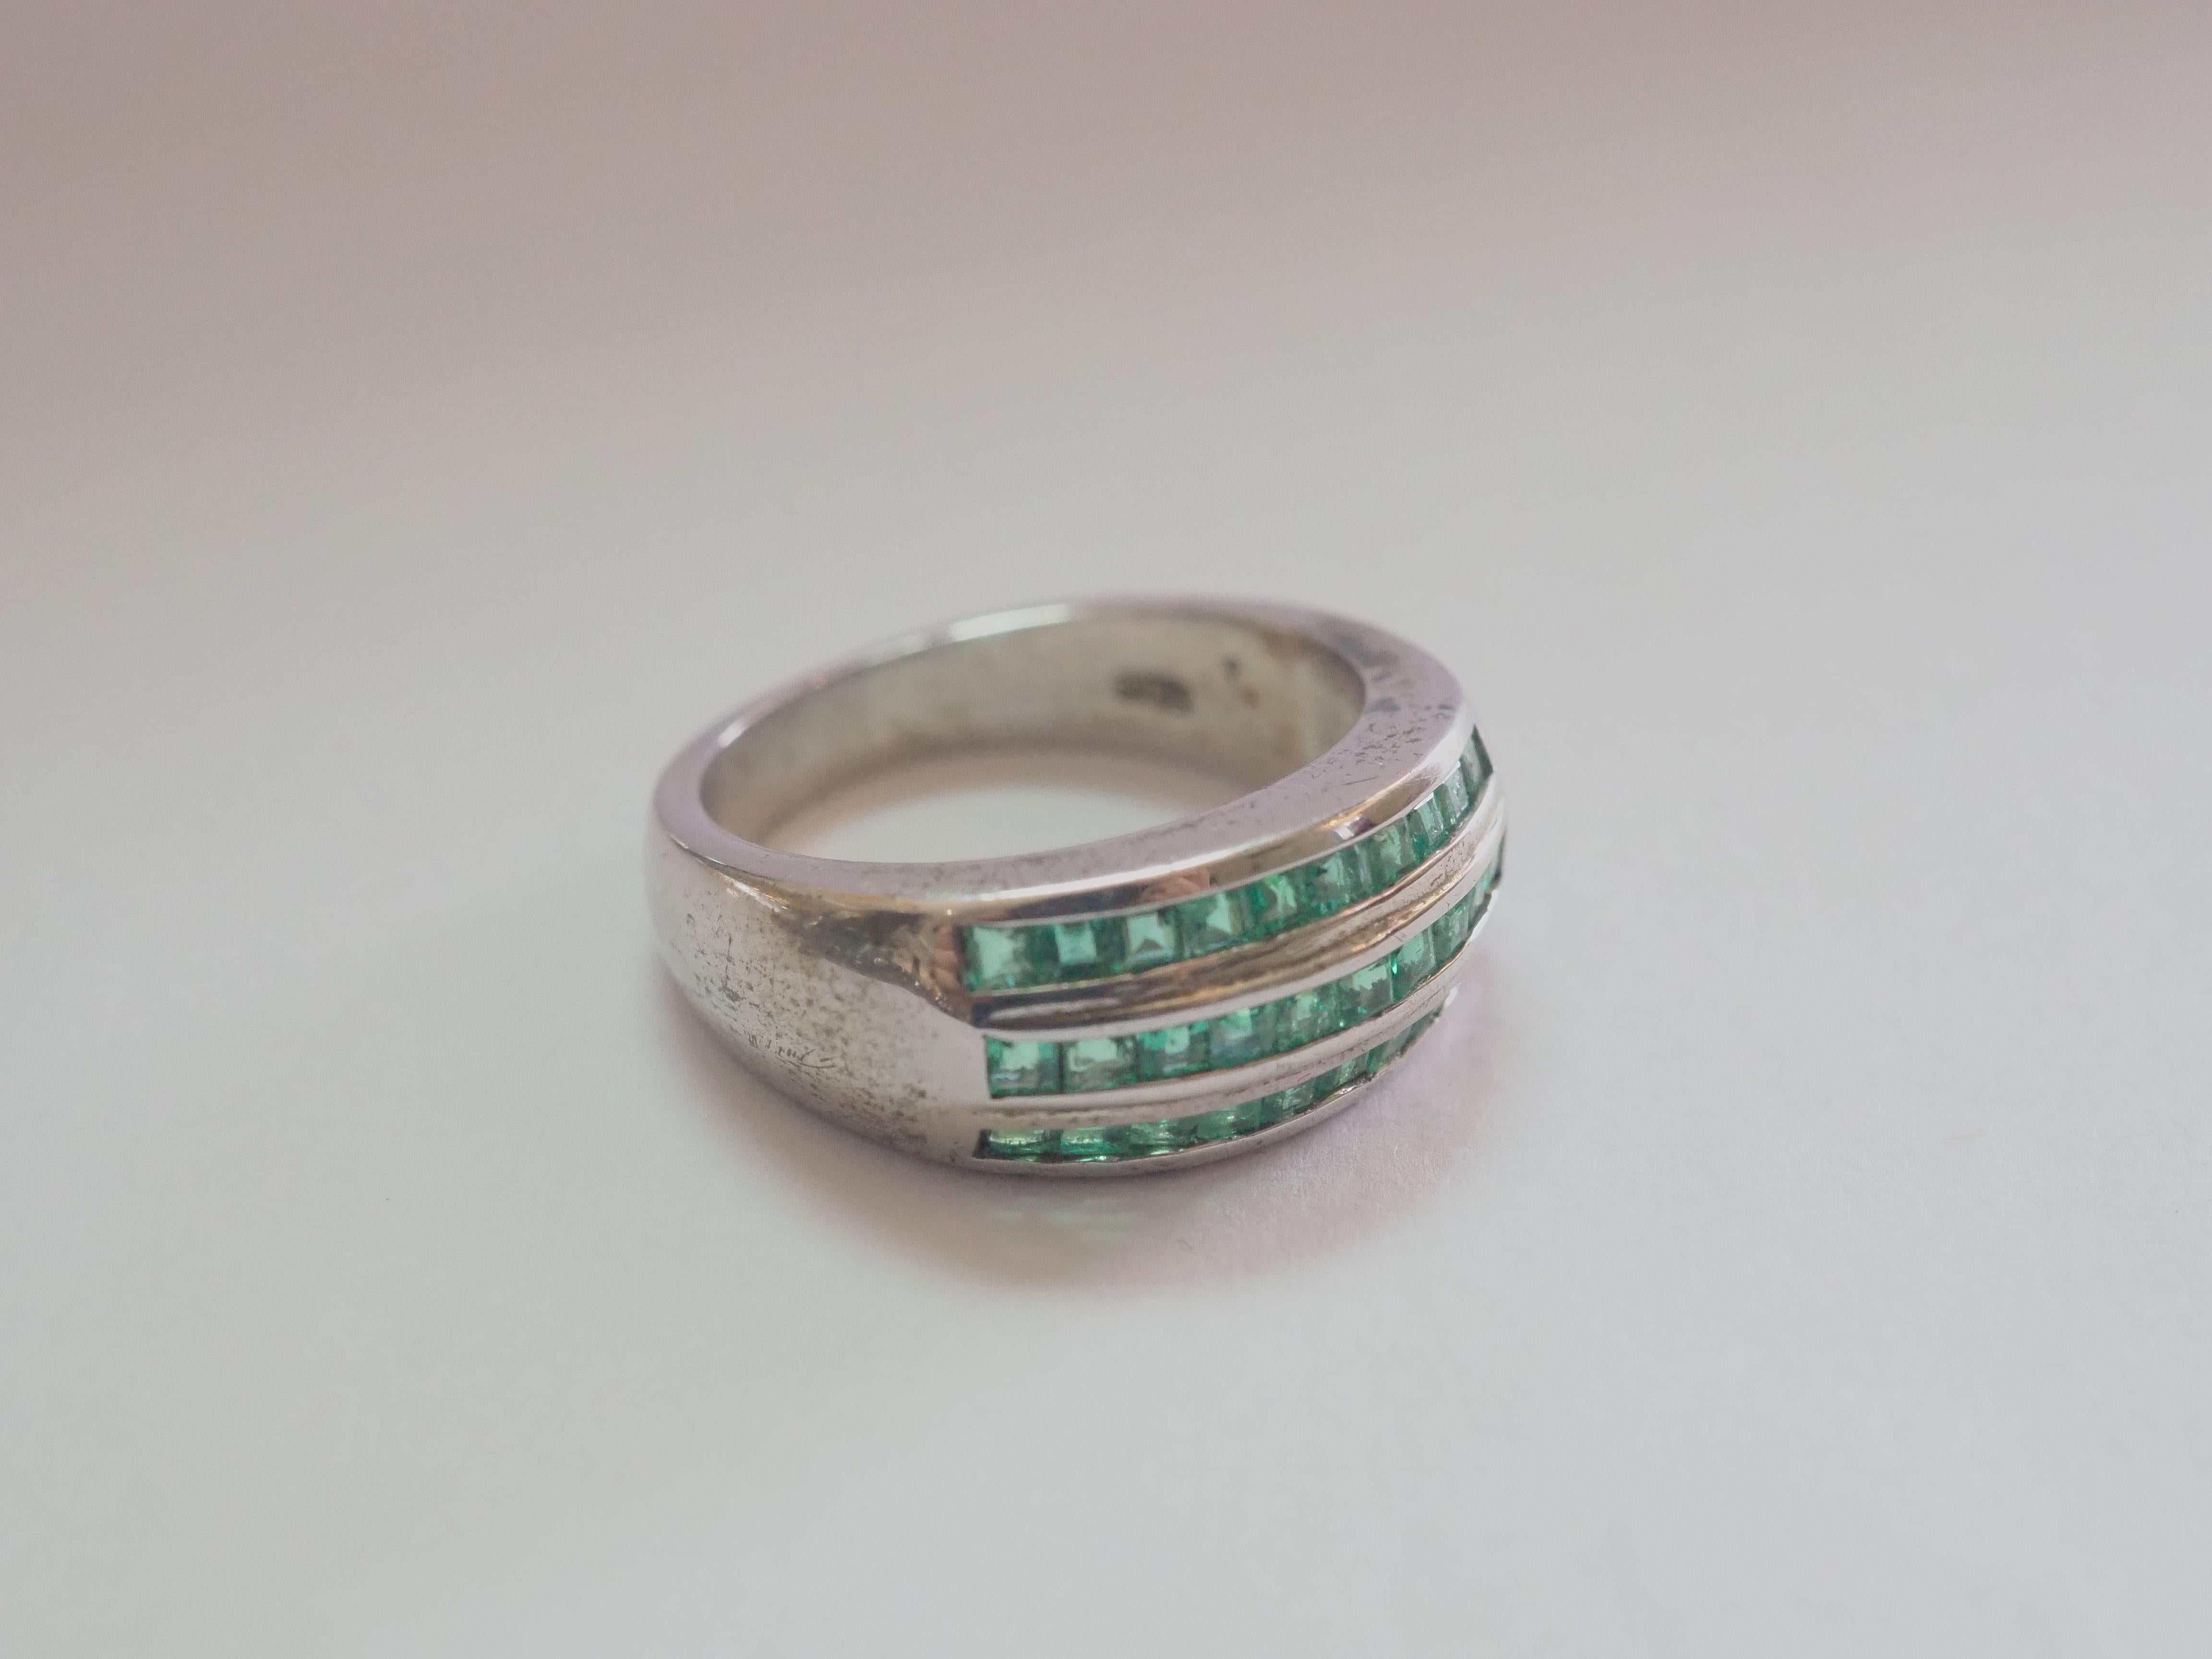 Unisex 1.60ct Channeled Emerald Sterling Silver Fashion Band Ring In Excellent Condition For Sale In เกาะสมุย, TH